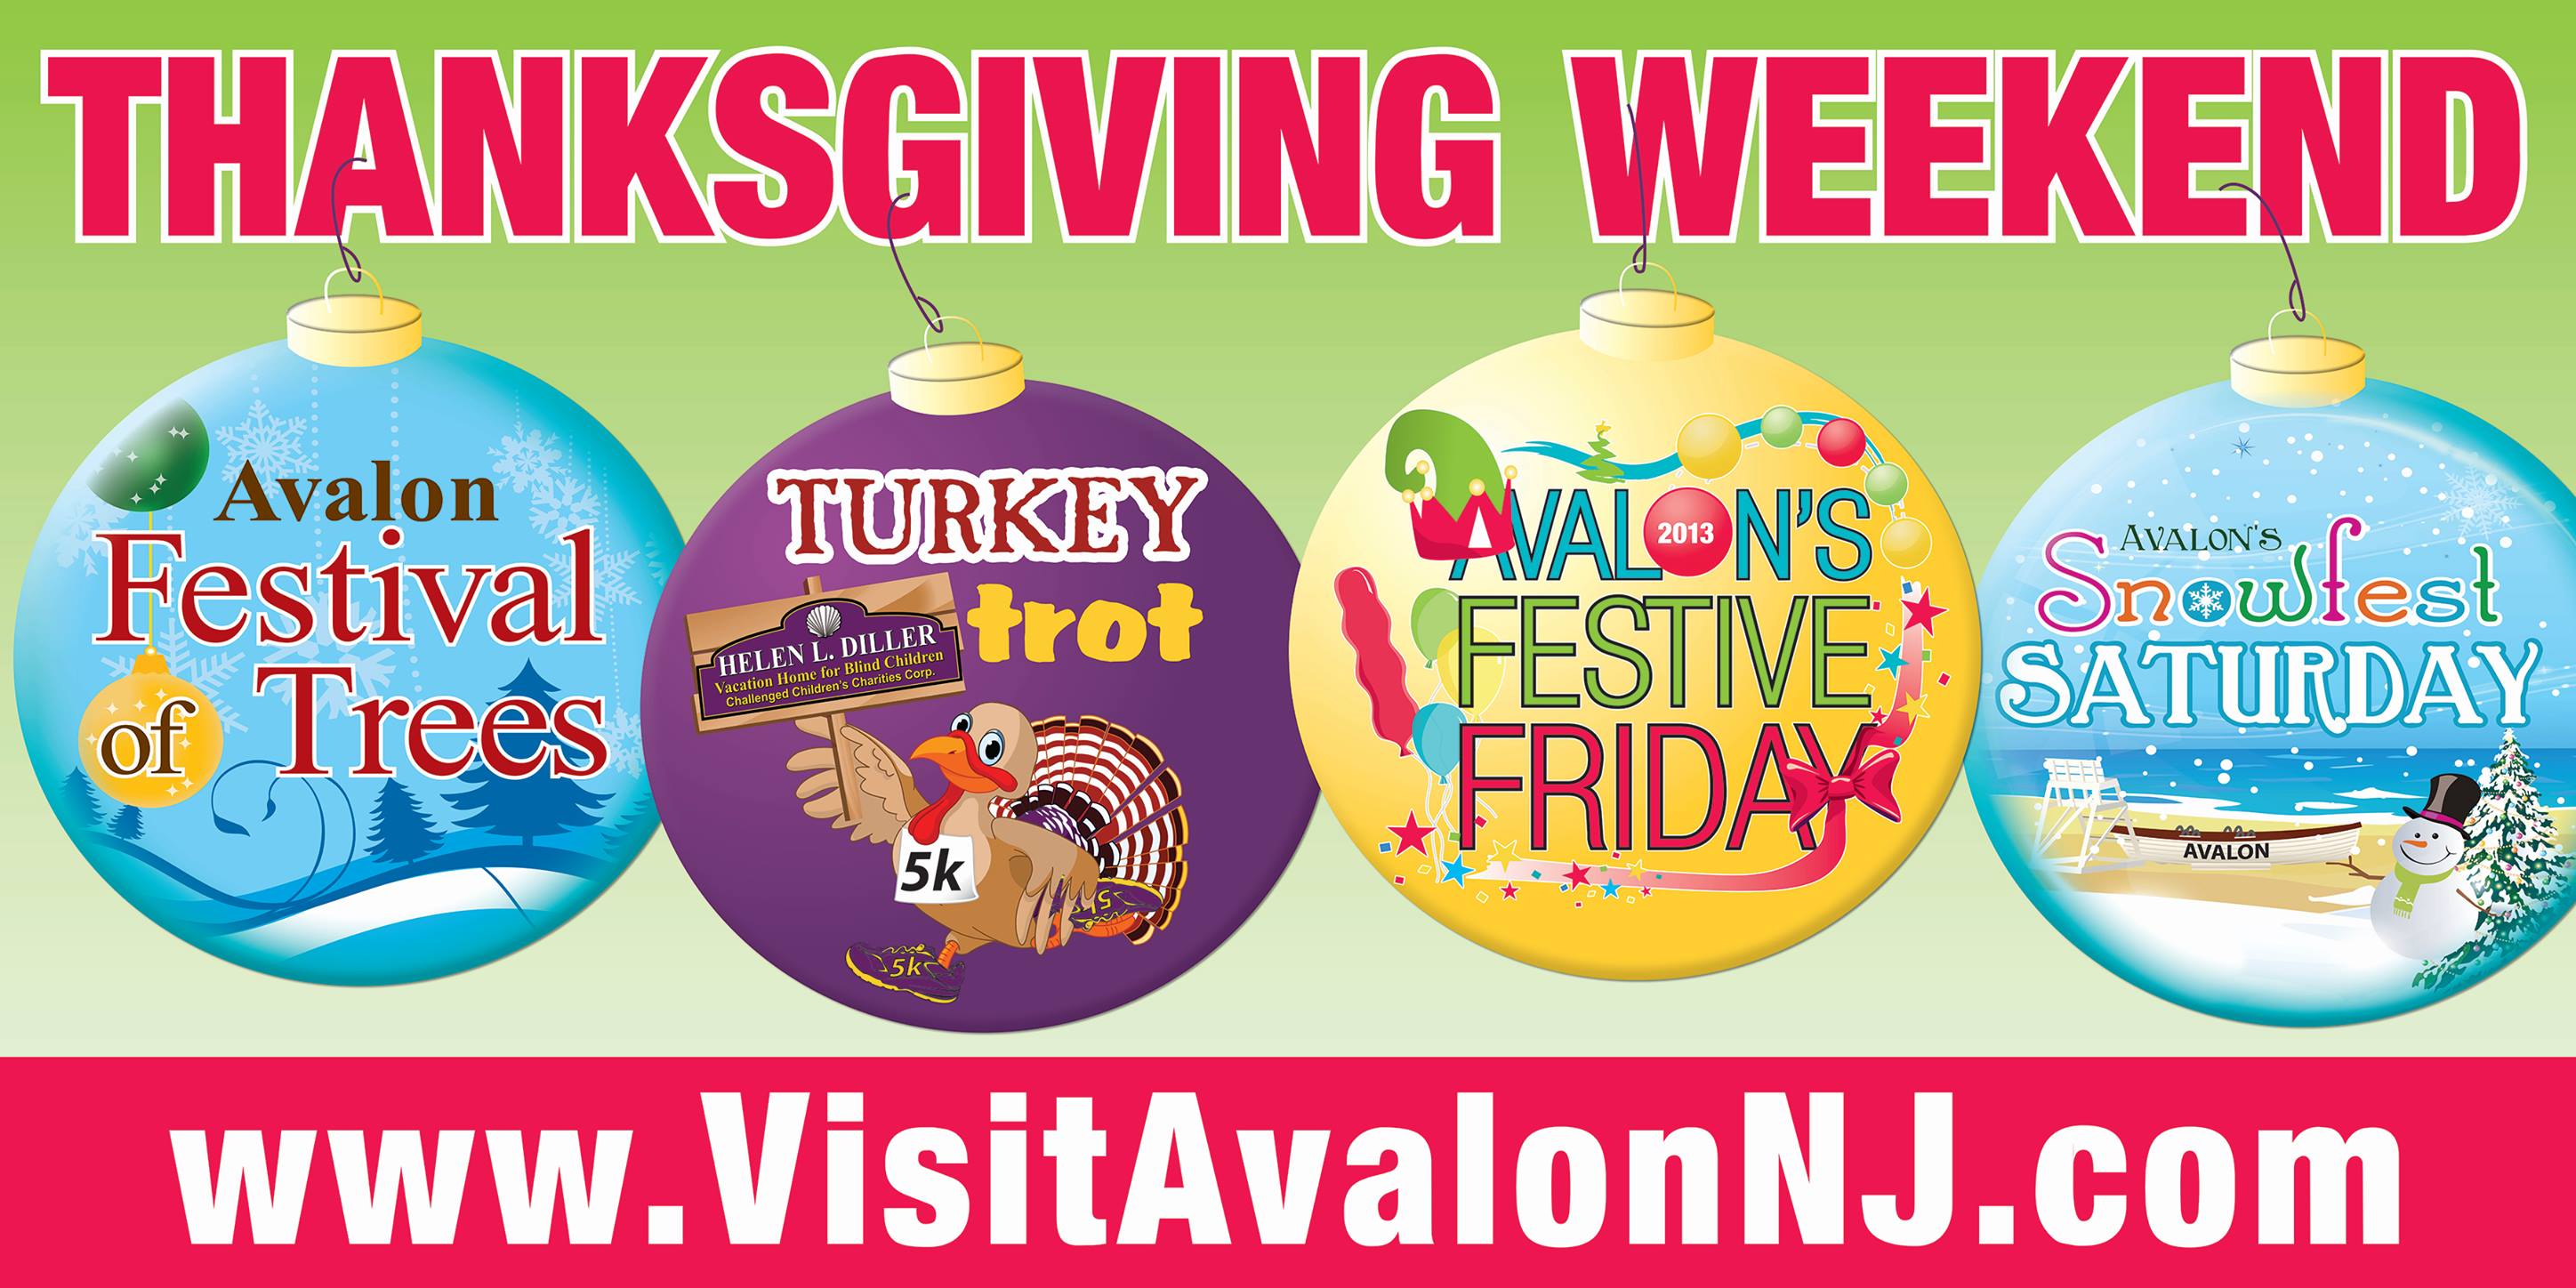 Thanksgiving Weekend Event Details in Avalon! Avalon, New Jersey